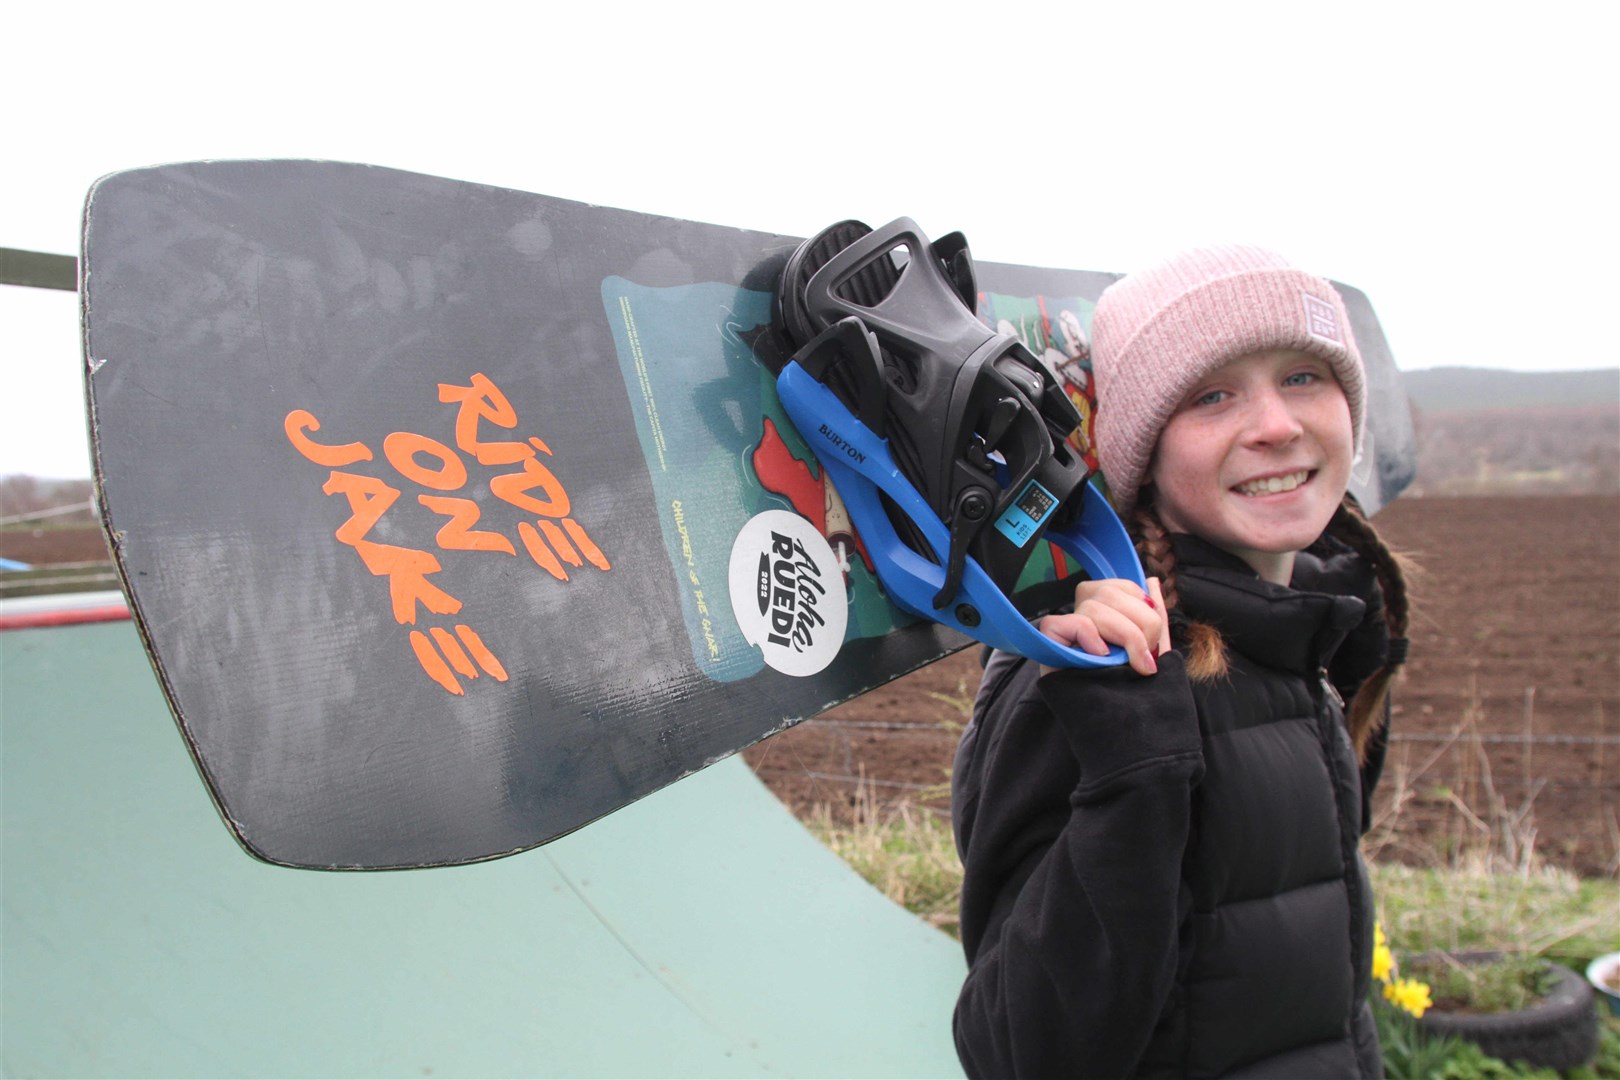 Emily Rothney won first place at this year's Swiss Under 15 Slopestyle Championships.